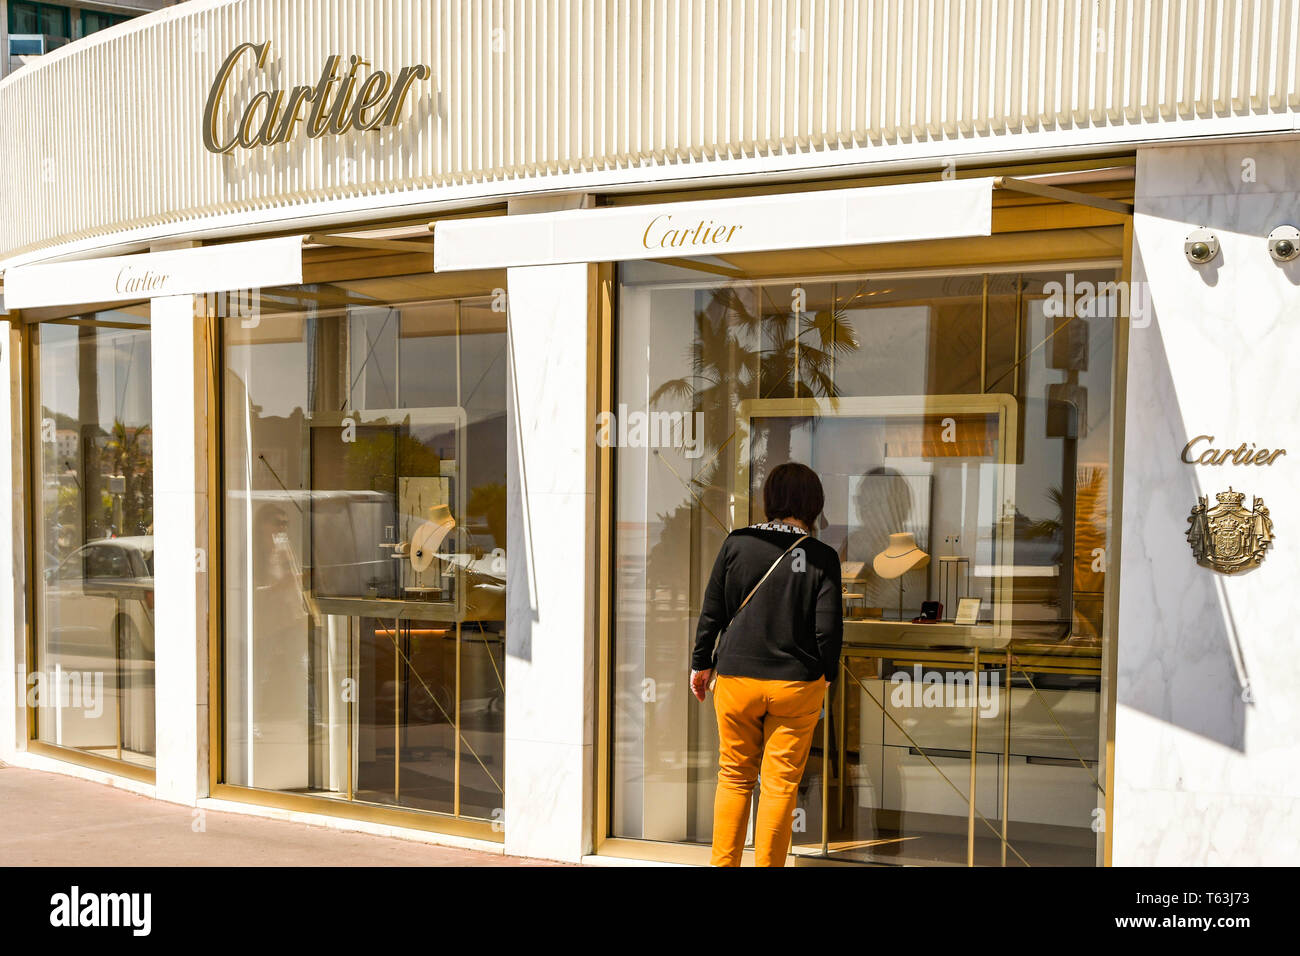 cartier store nearby